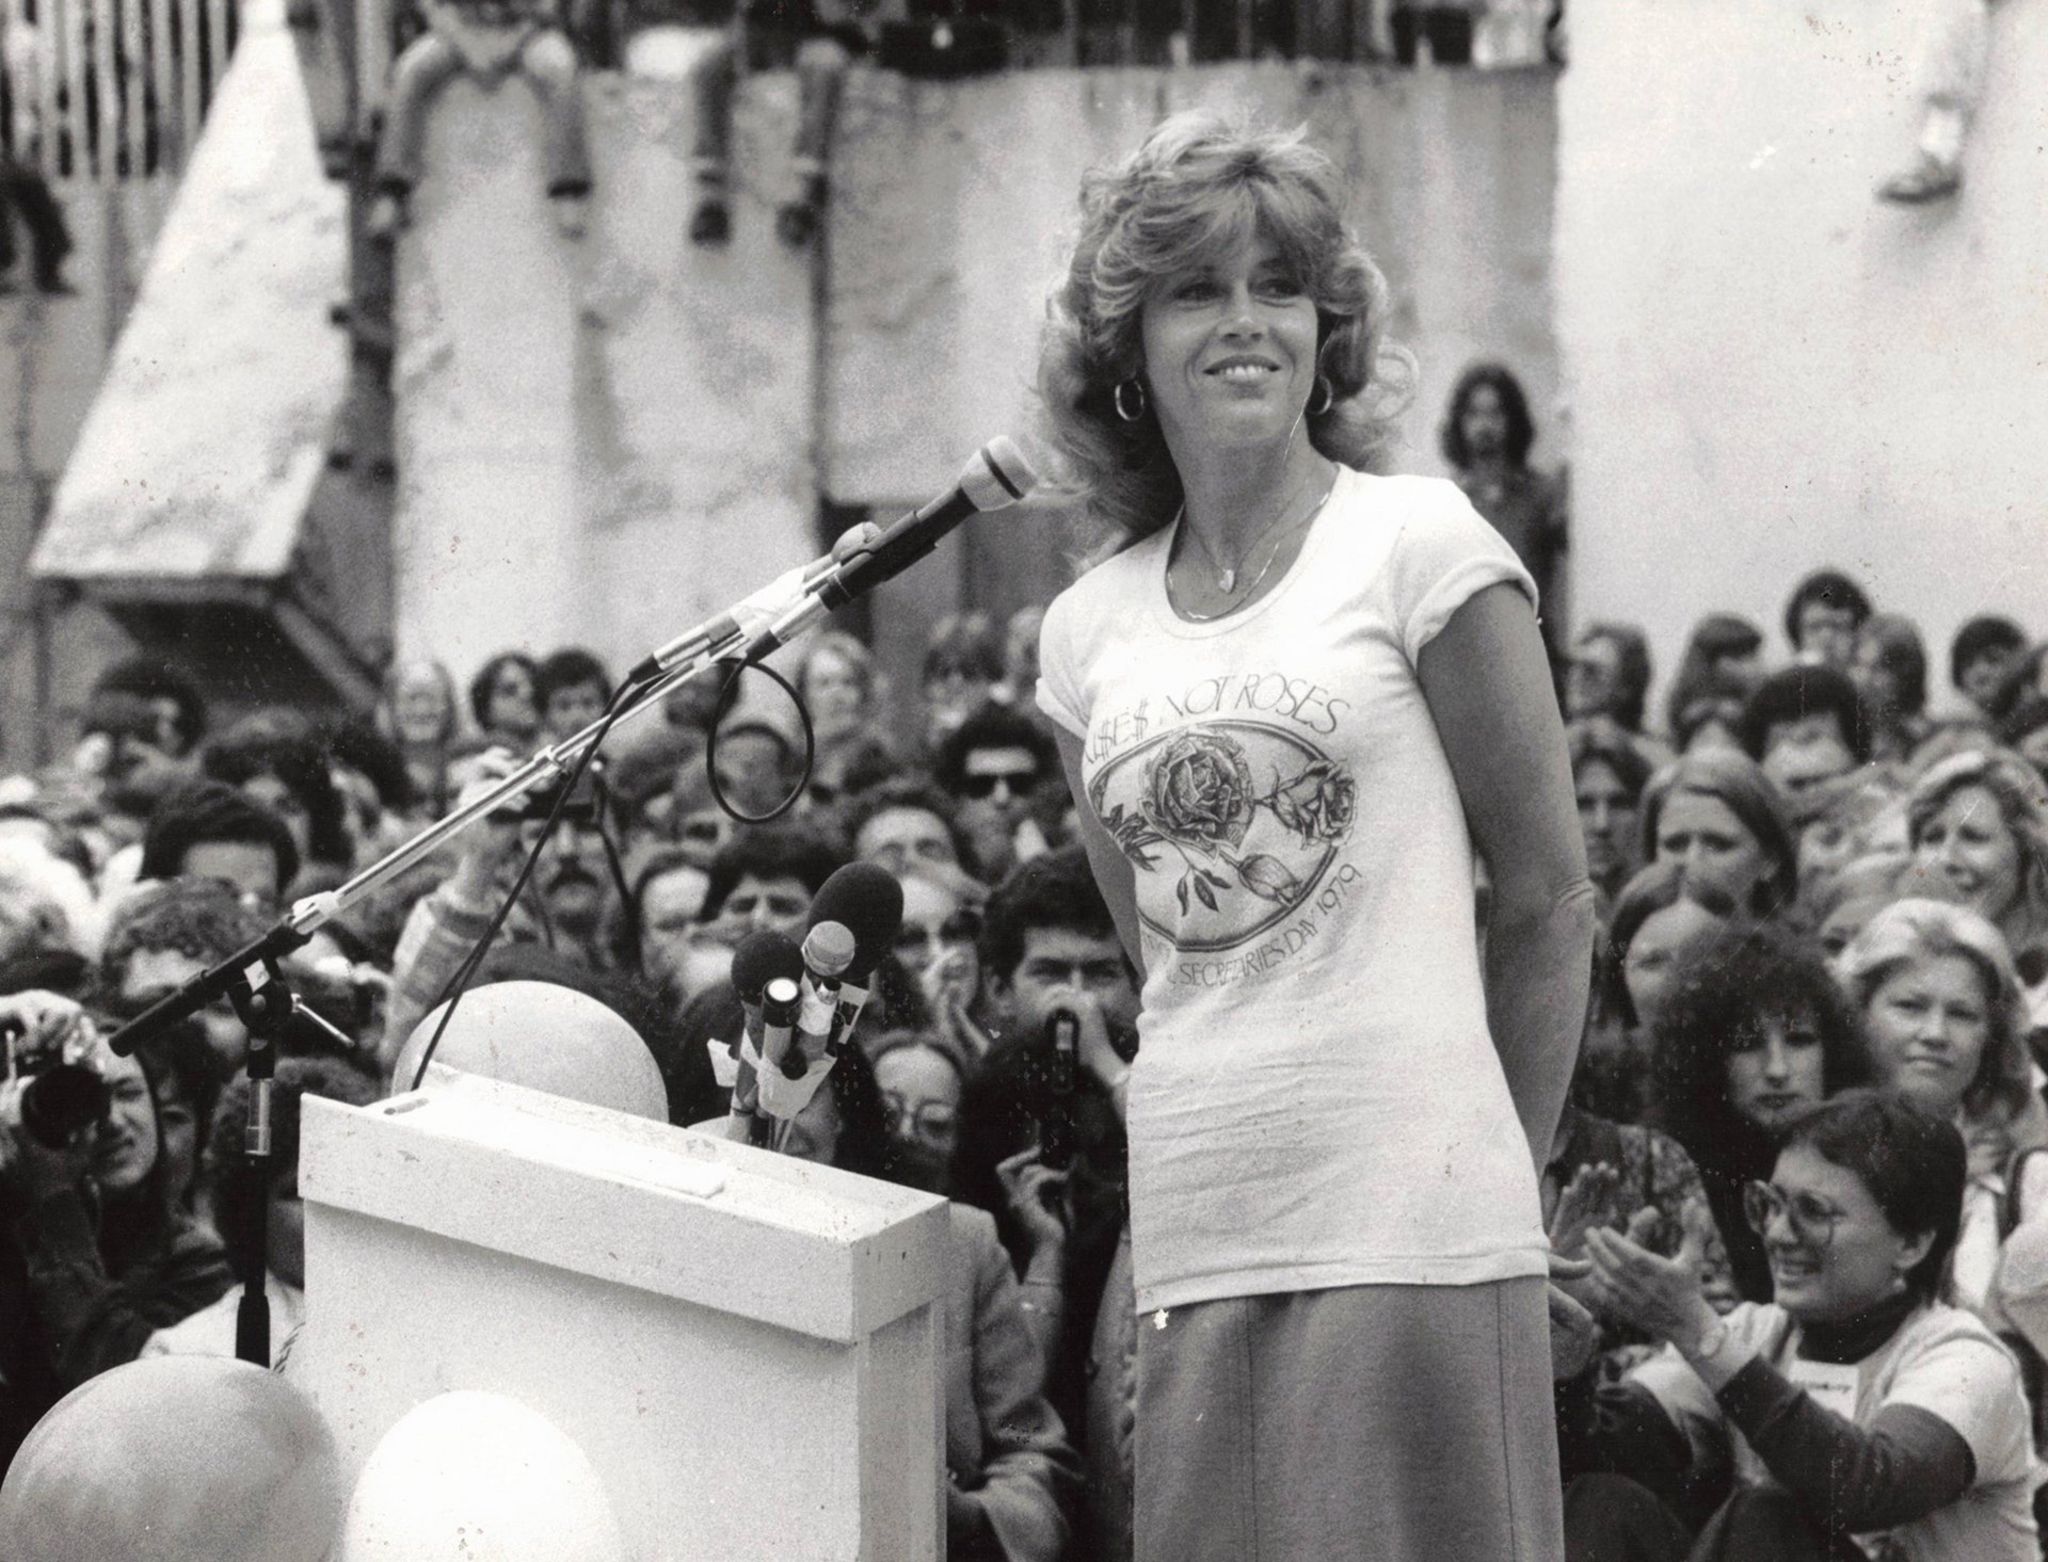 Jane Fonda at the 9 to 5 Summer School in 1977